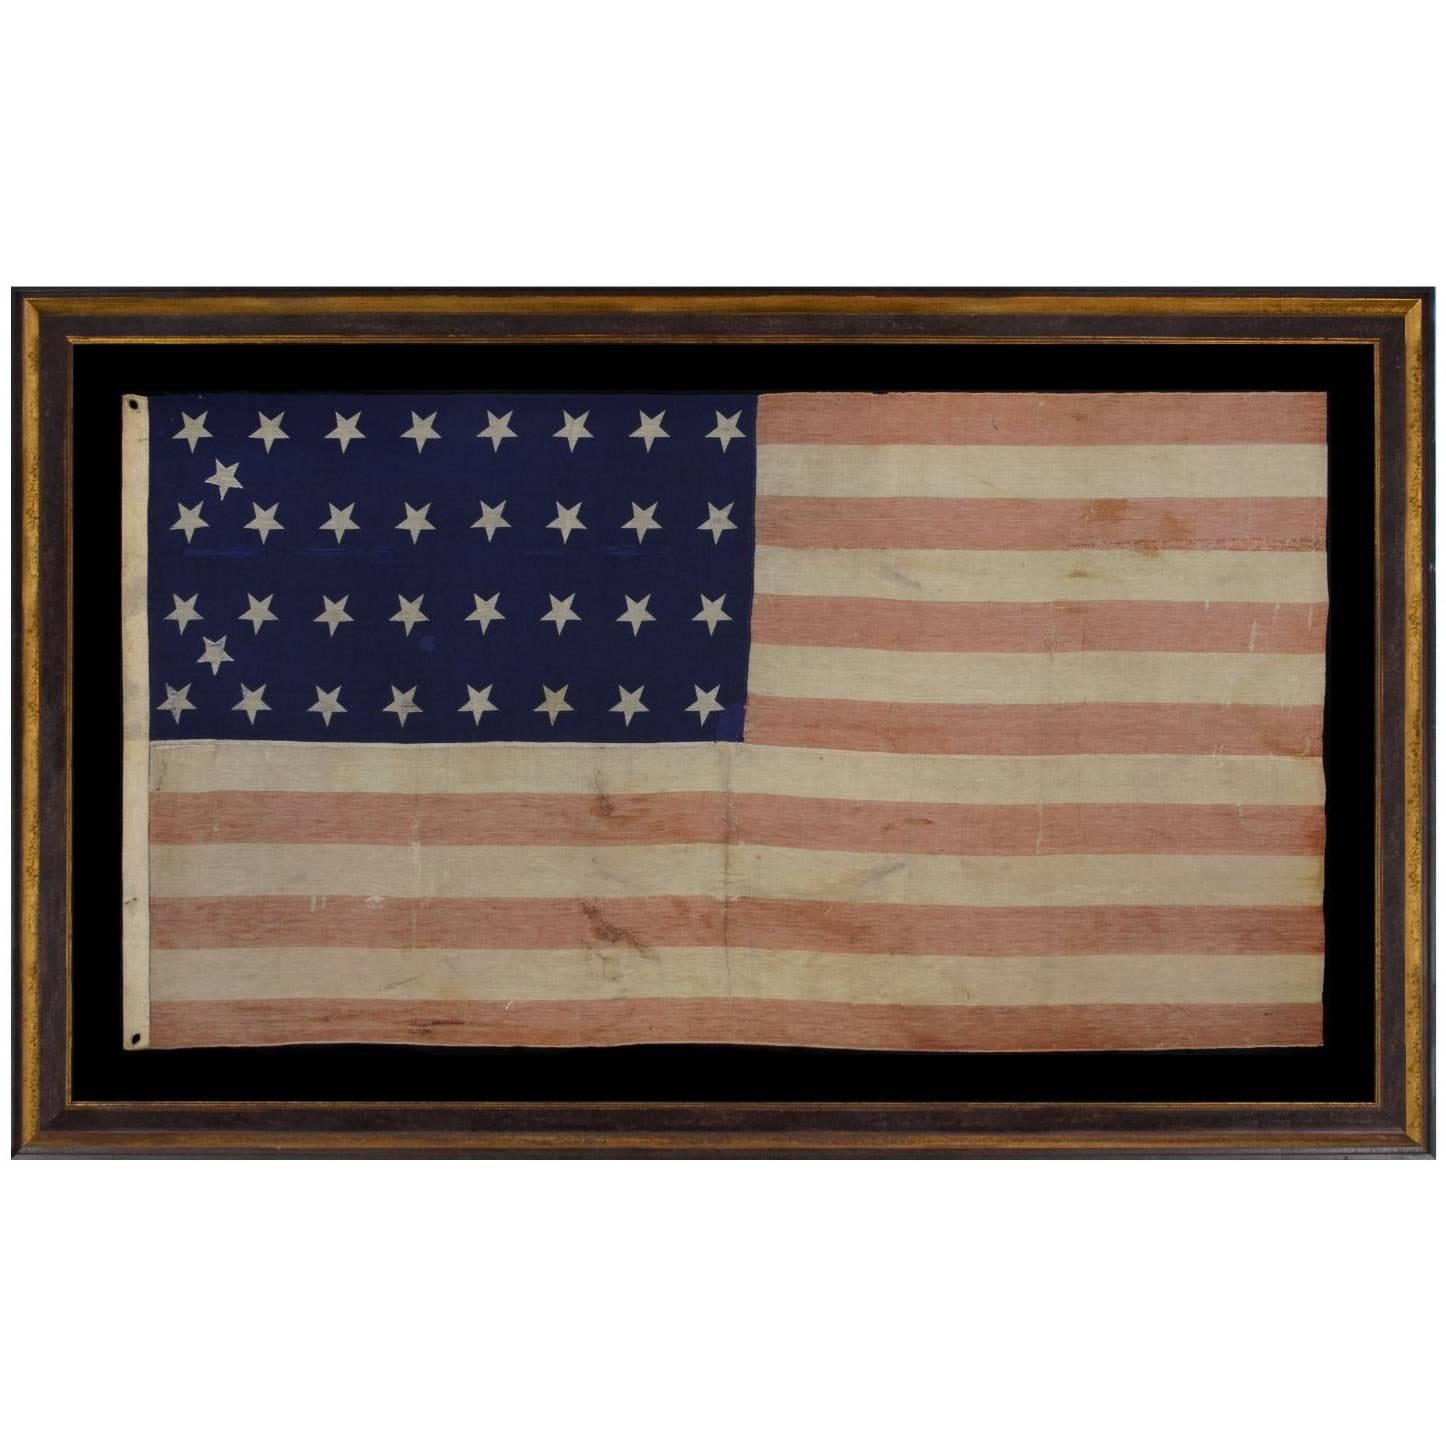 34 Star Civil War Period Flag with Unusual Woven Stripes and Press Dyed Stars